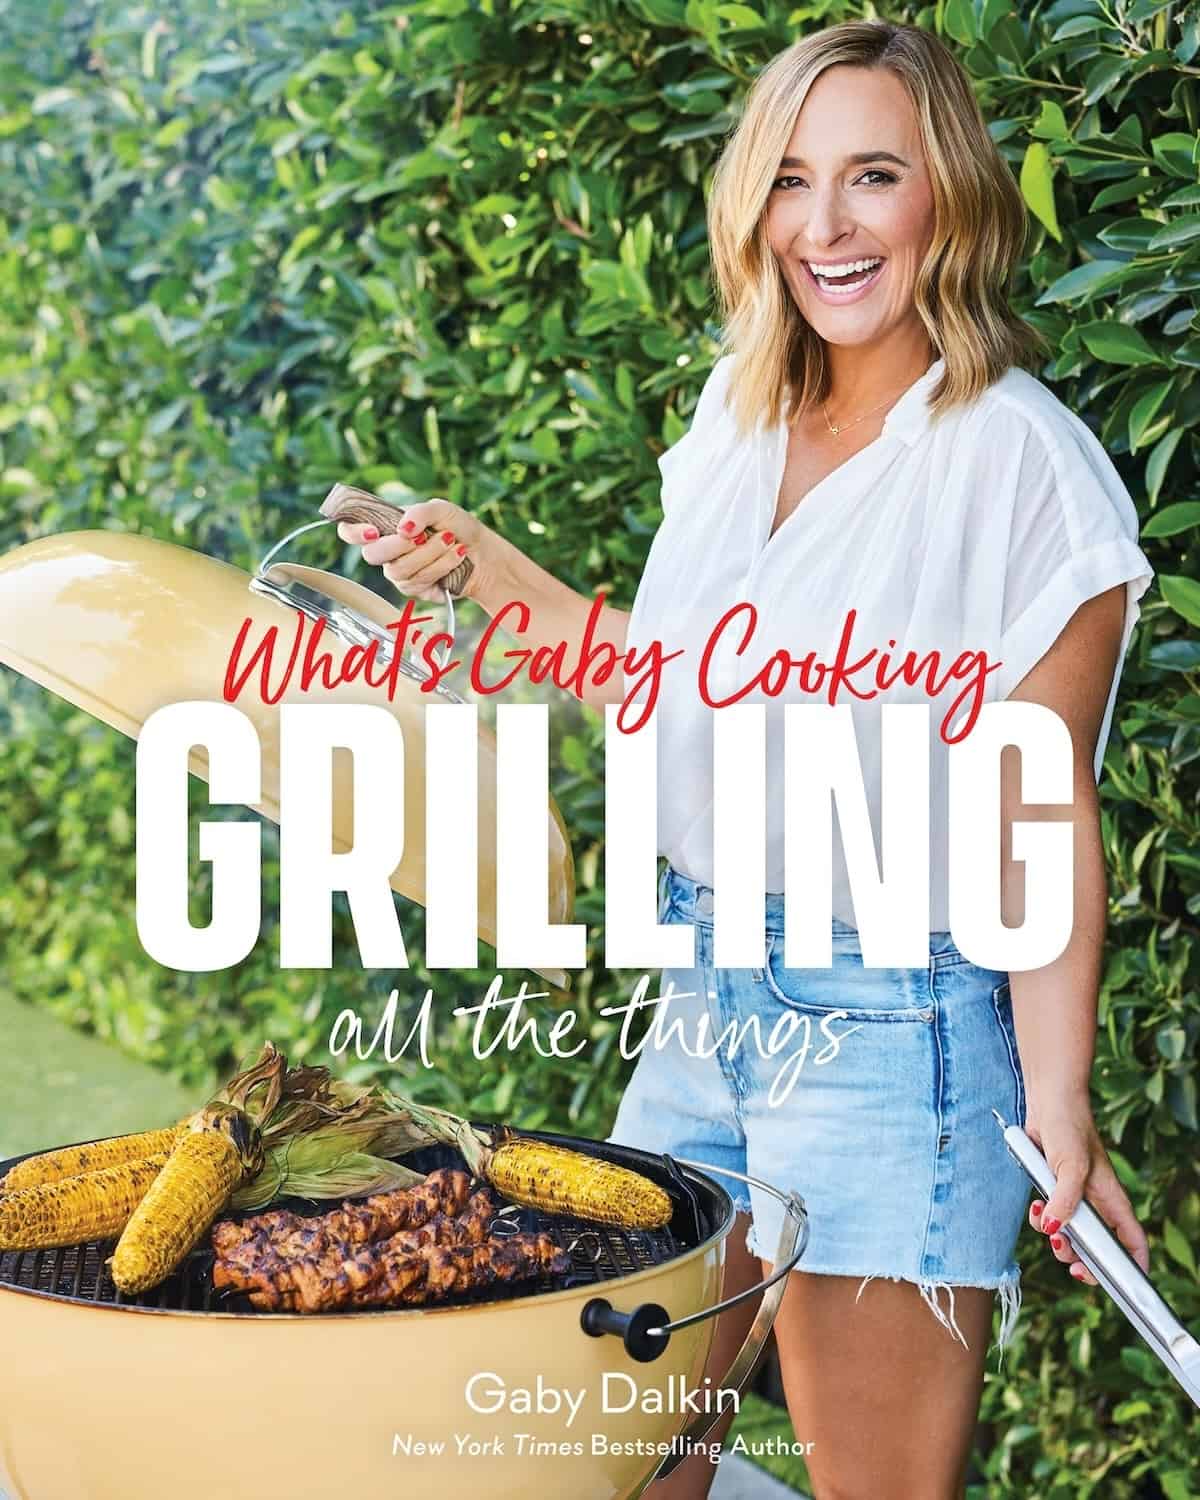 Cookbook #5 // Grilling All The Things + Book Tour